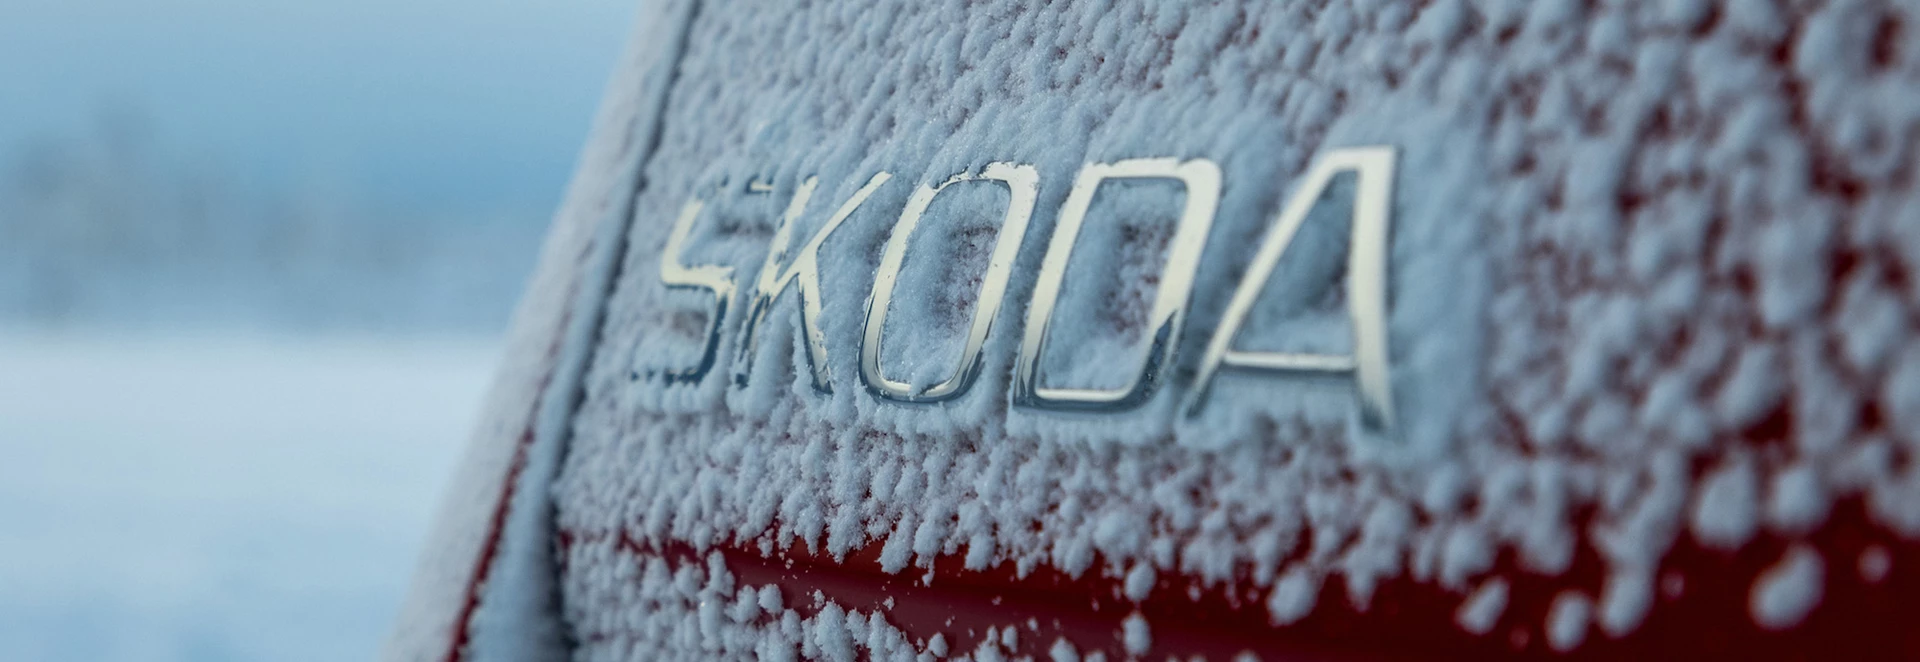 Taking on the most extreme winter conditions in Skoda’s 4x4 range